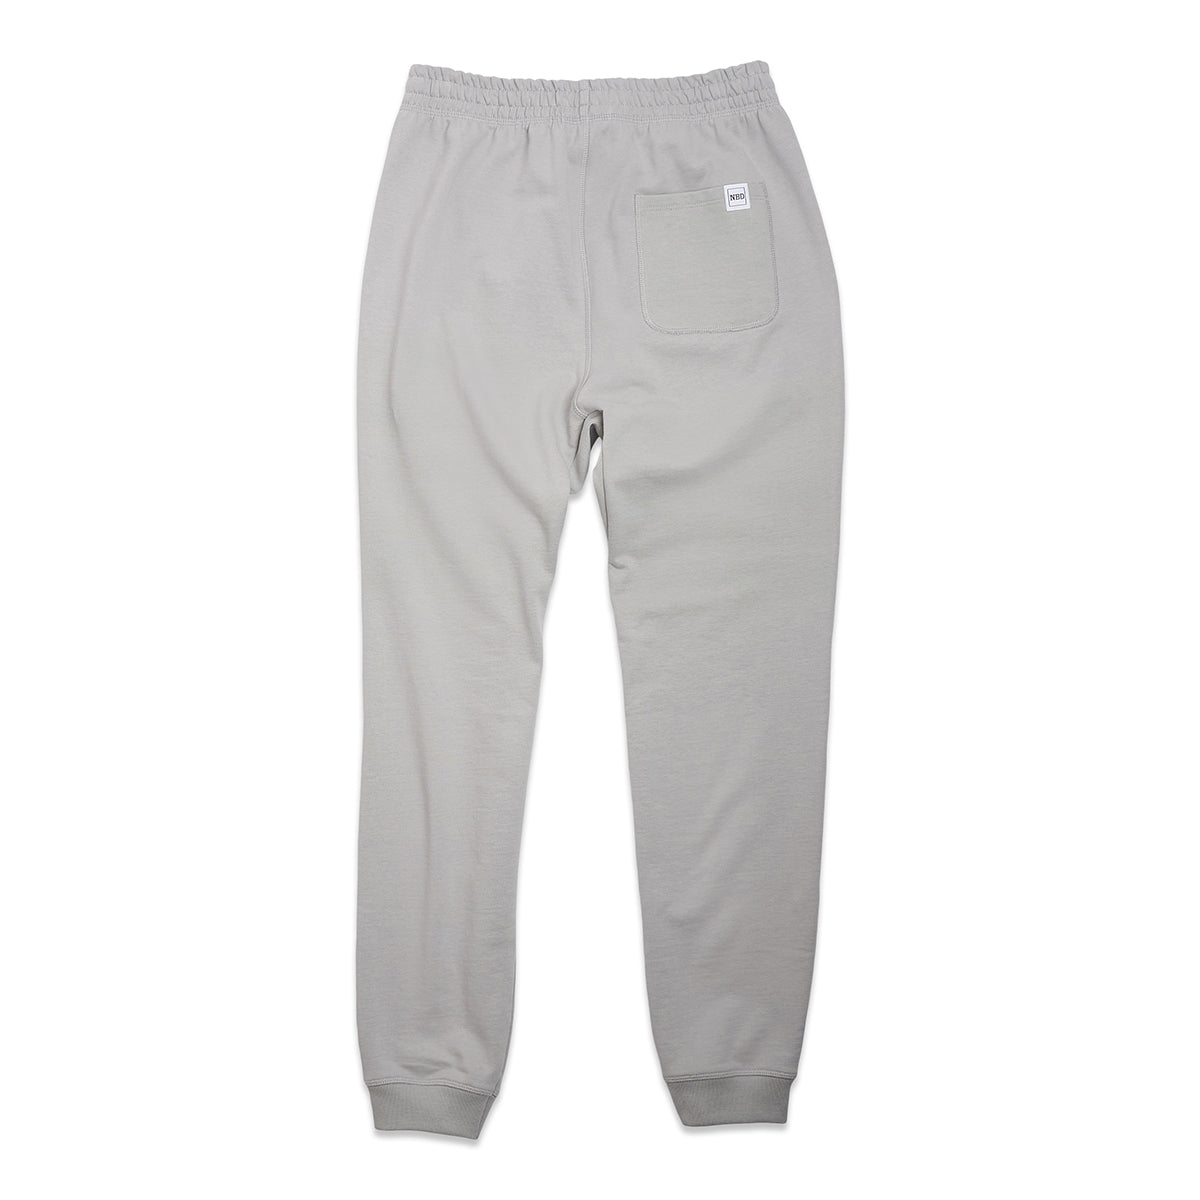 NBD Premium Collection Joggers-Sweatpants-Spittin Chiclets-Barstool Sports